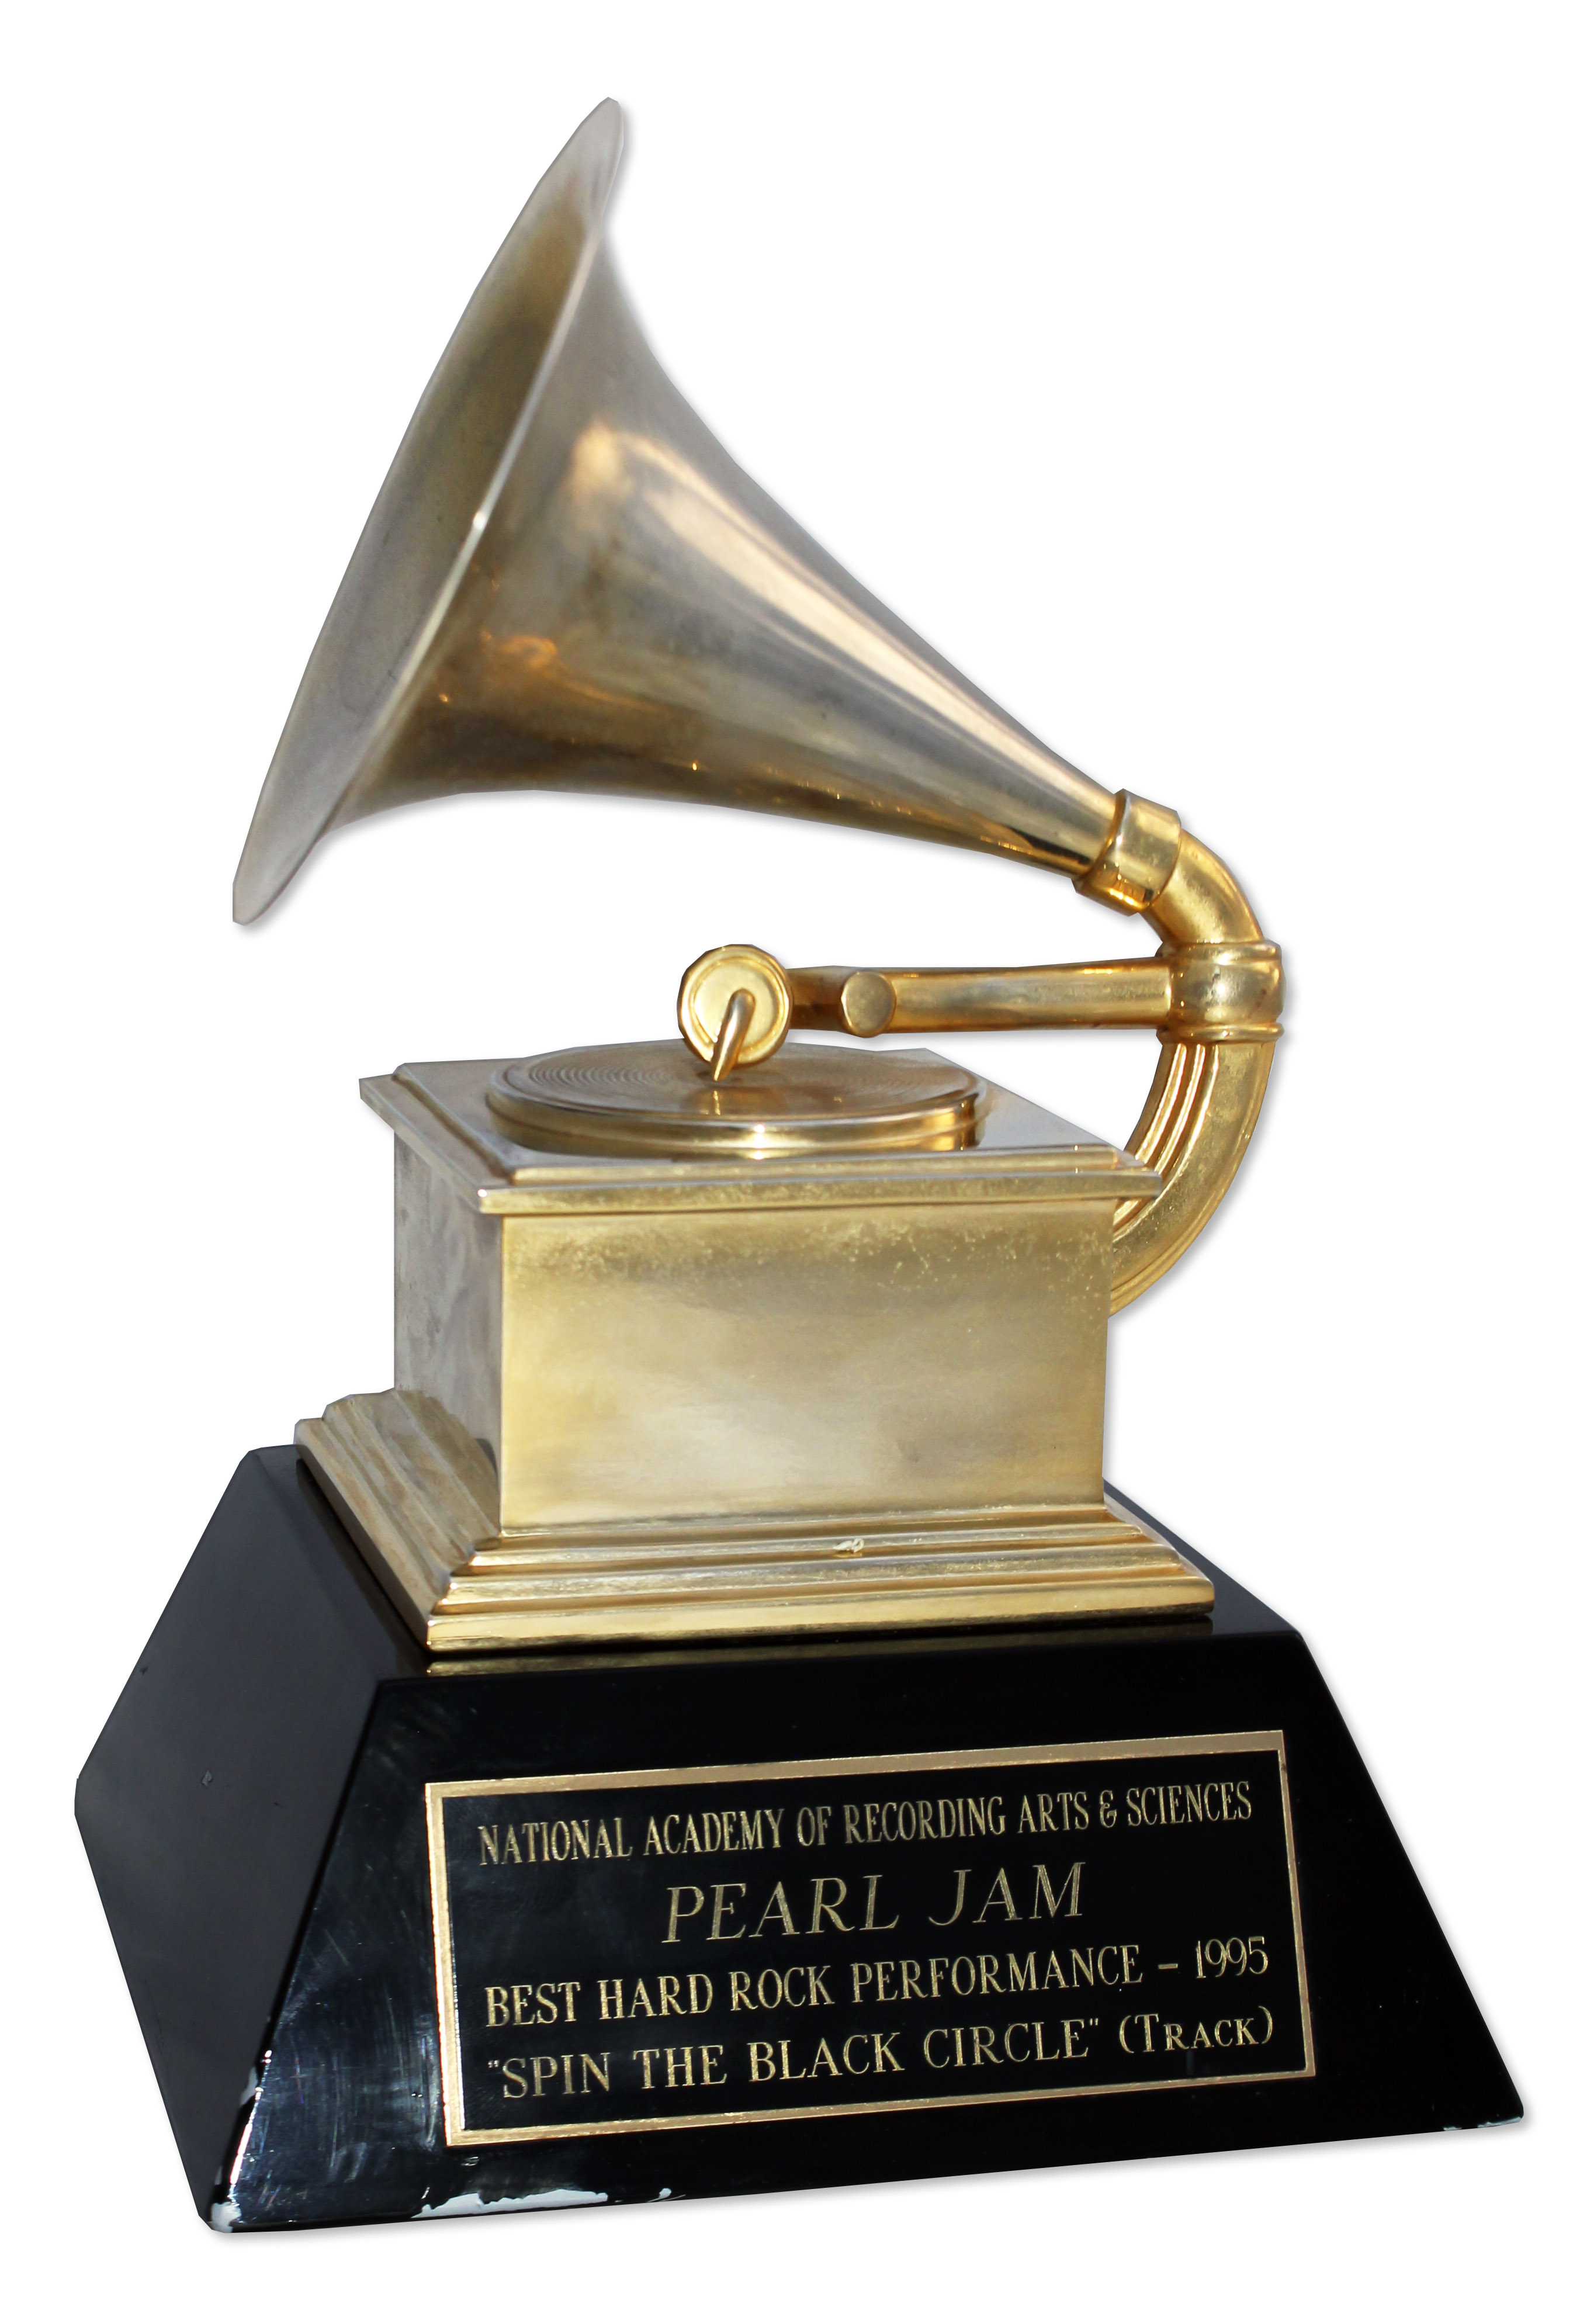 Grammy Auction Grammy Award Given to Rock Group Pearl Jam in 1995 -- Award for Best Hard Rock Performance -- Only Grammy That Pearl Jam Ever Won